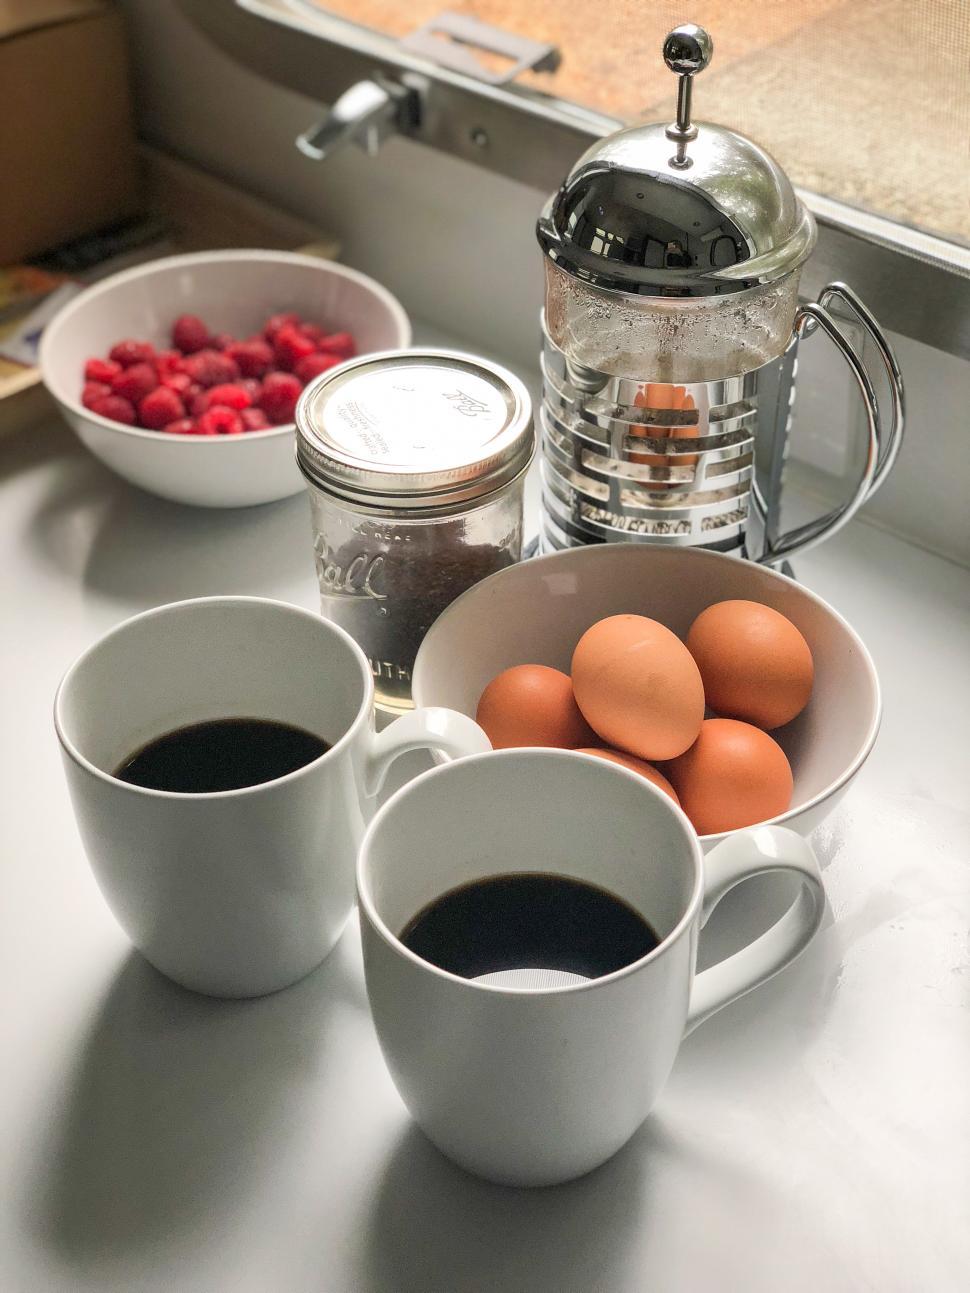 Free Image of Eggs and Coffee 